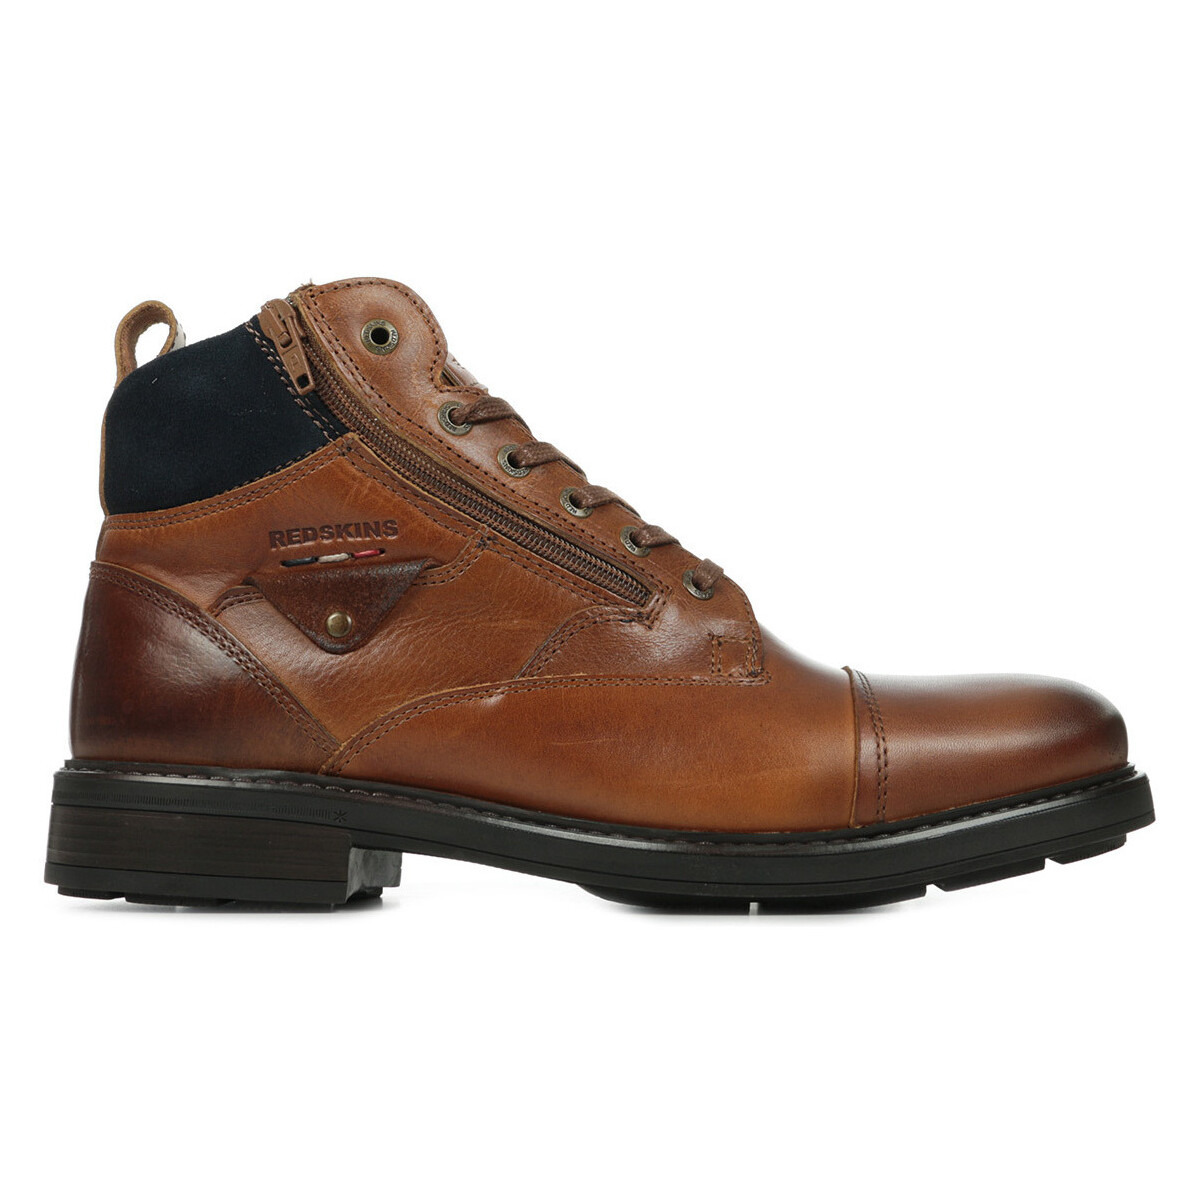 Redskins - Man Brown Boots from Spartoo GOOFASH